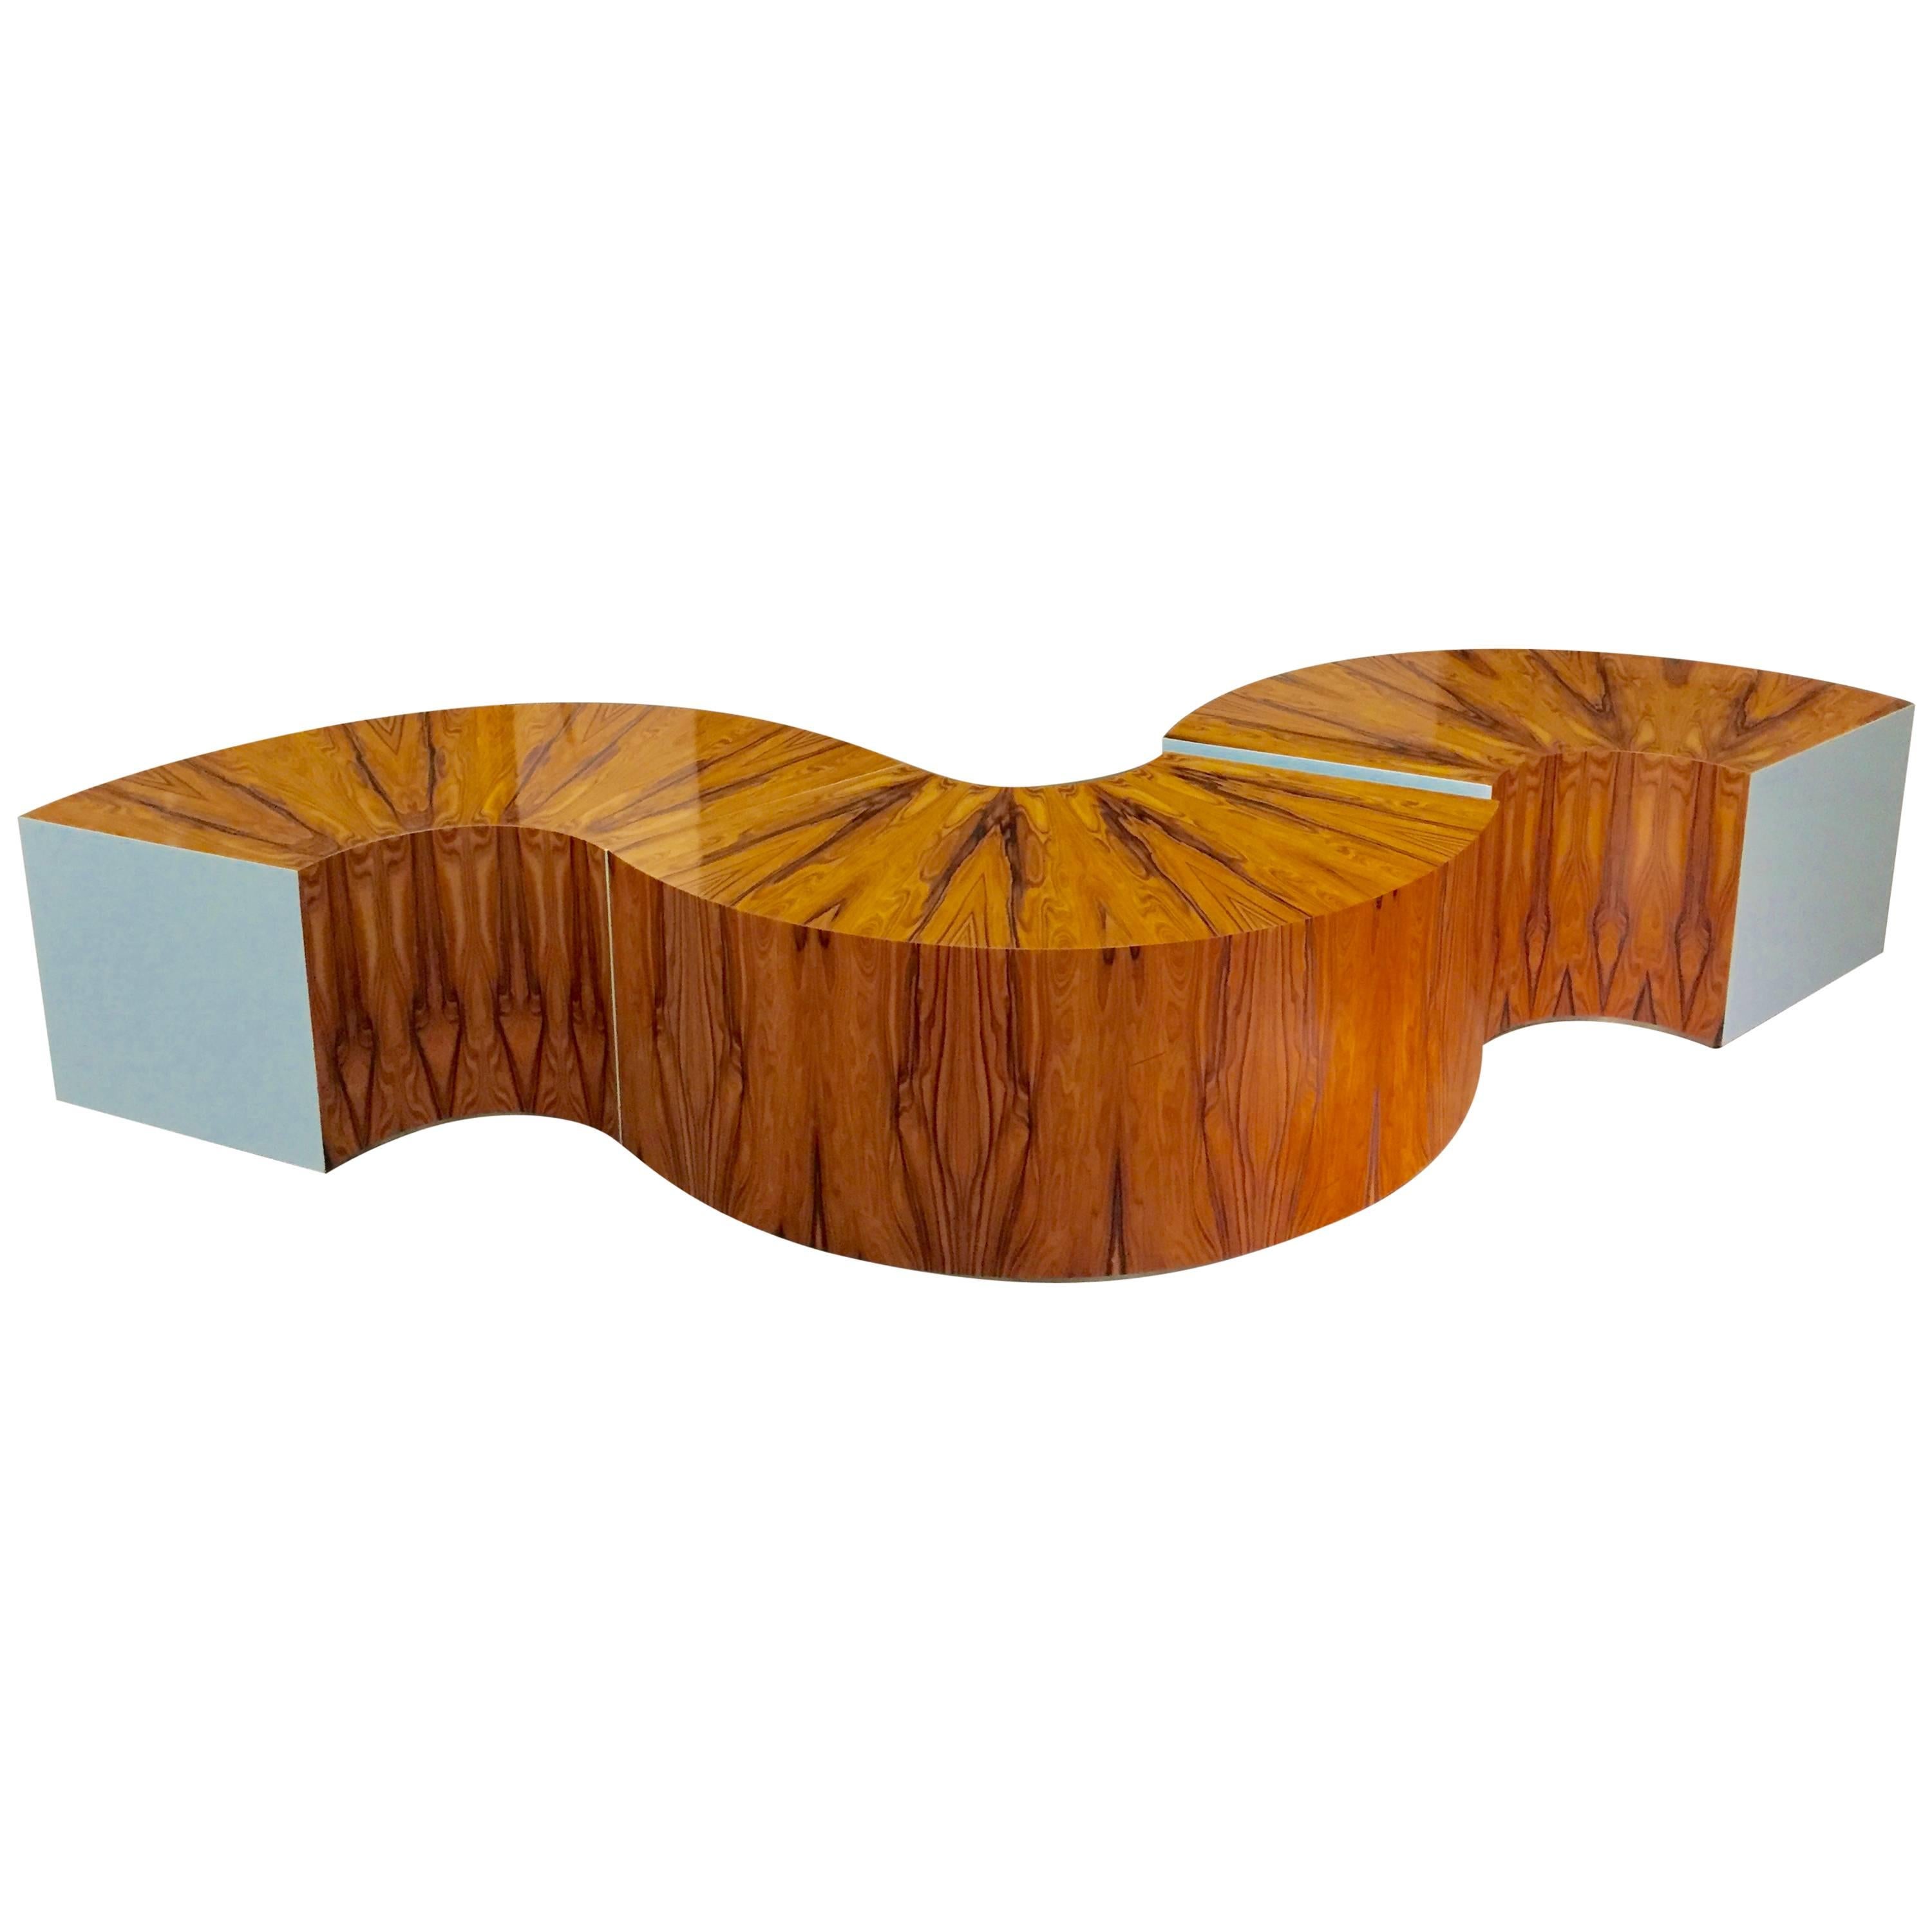 A beautifully designed and custom-made table by a noted California designer. The piece comes with a copy of the original invoice and the name of the designer and invoice will accompany the piece. It is made of three circular sections which can be